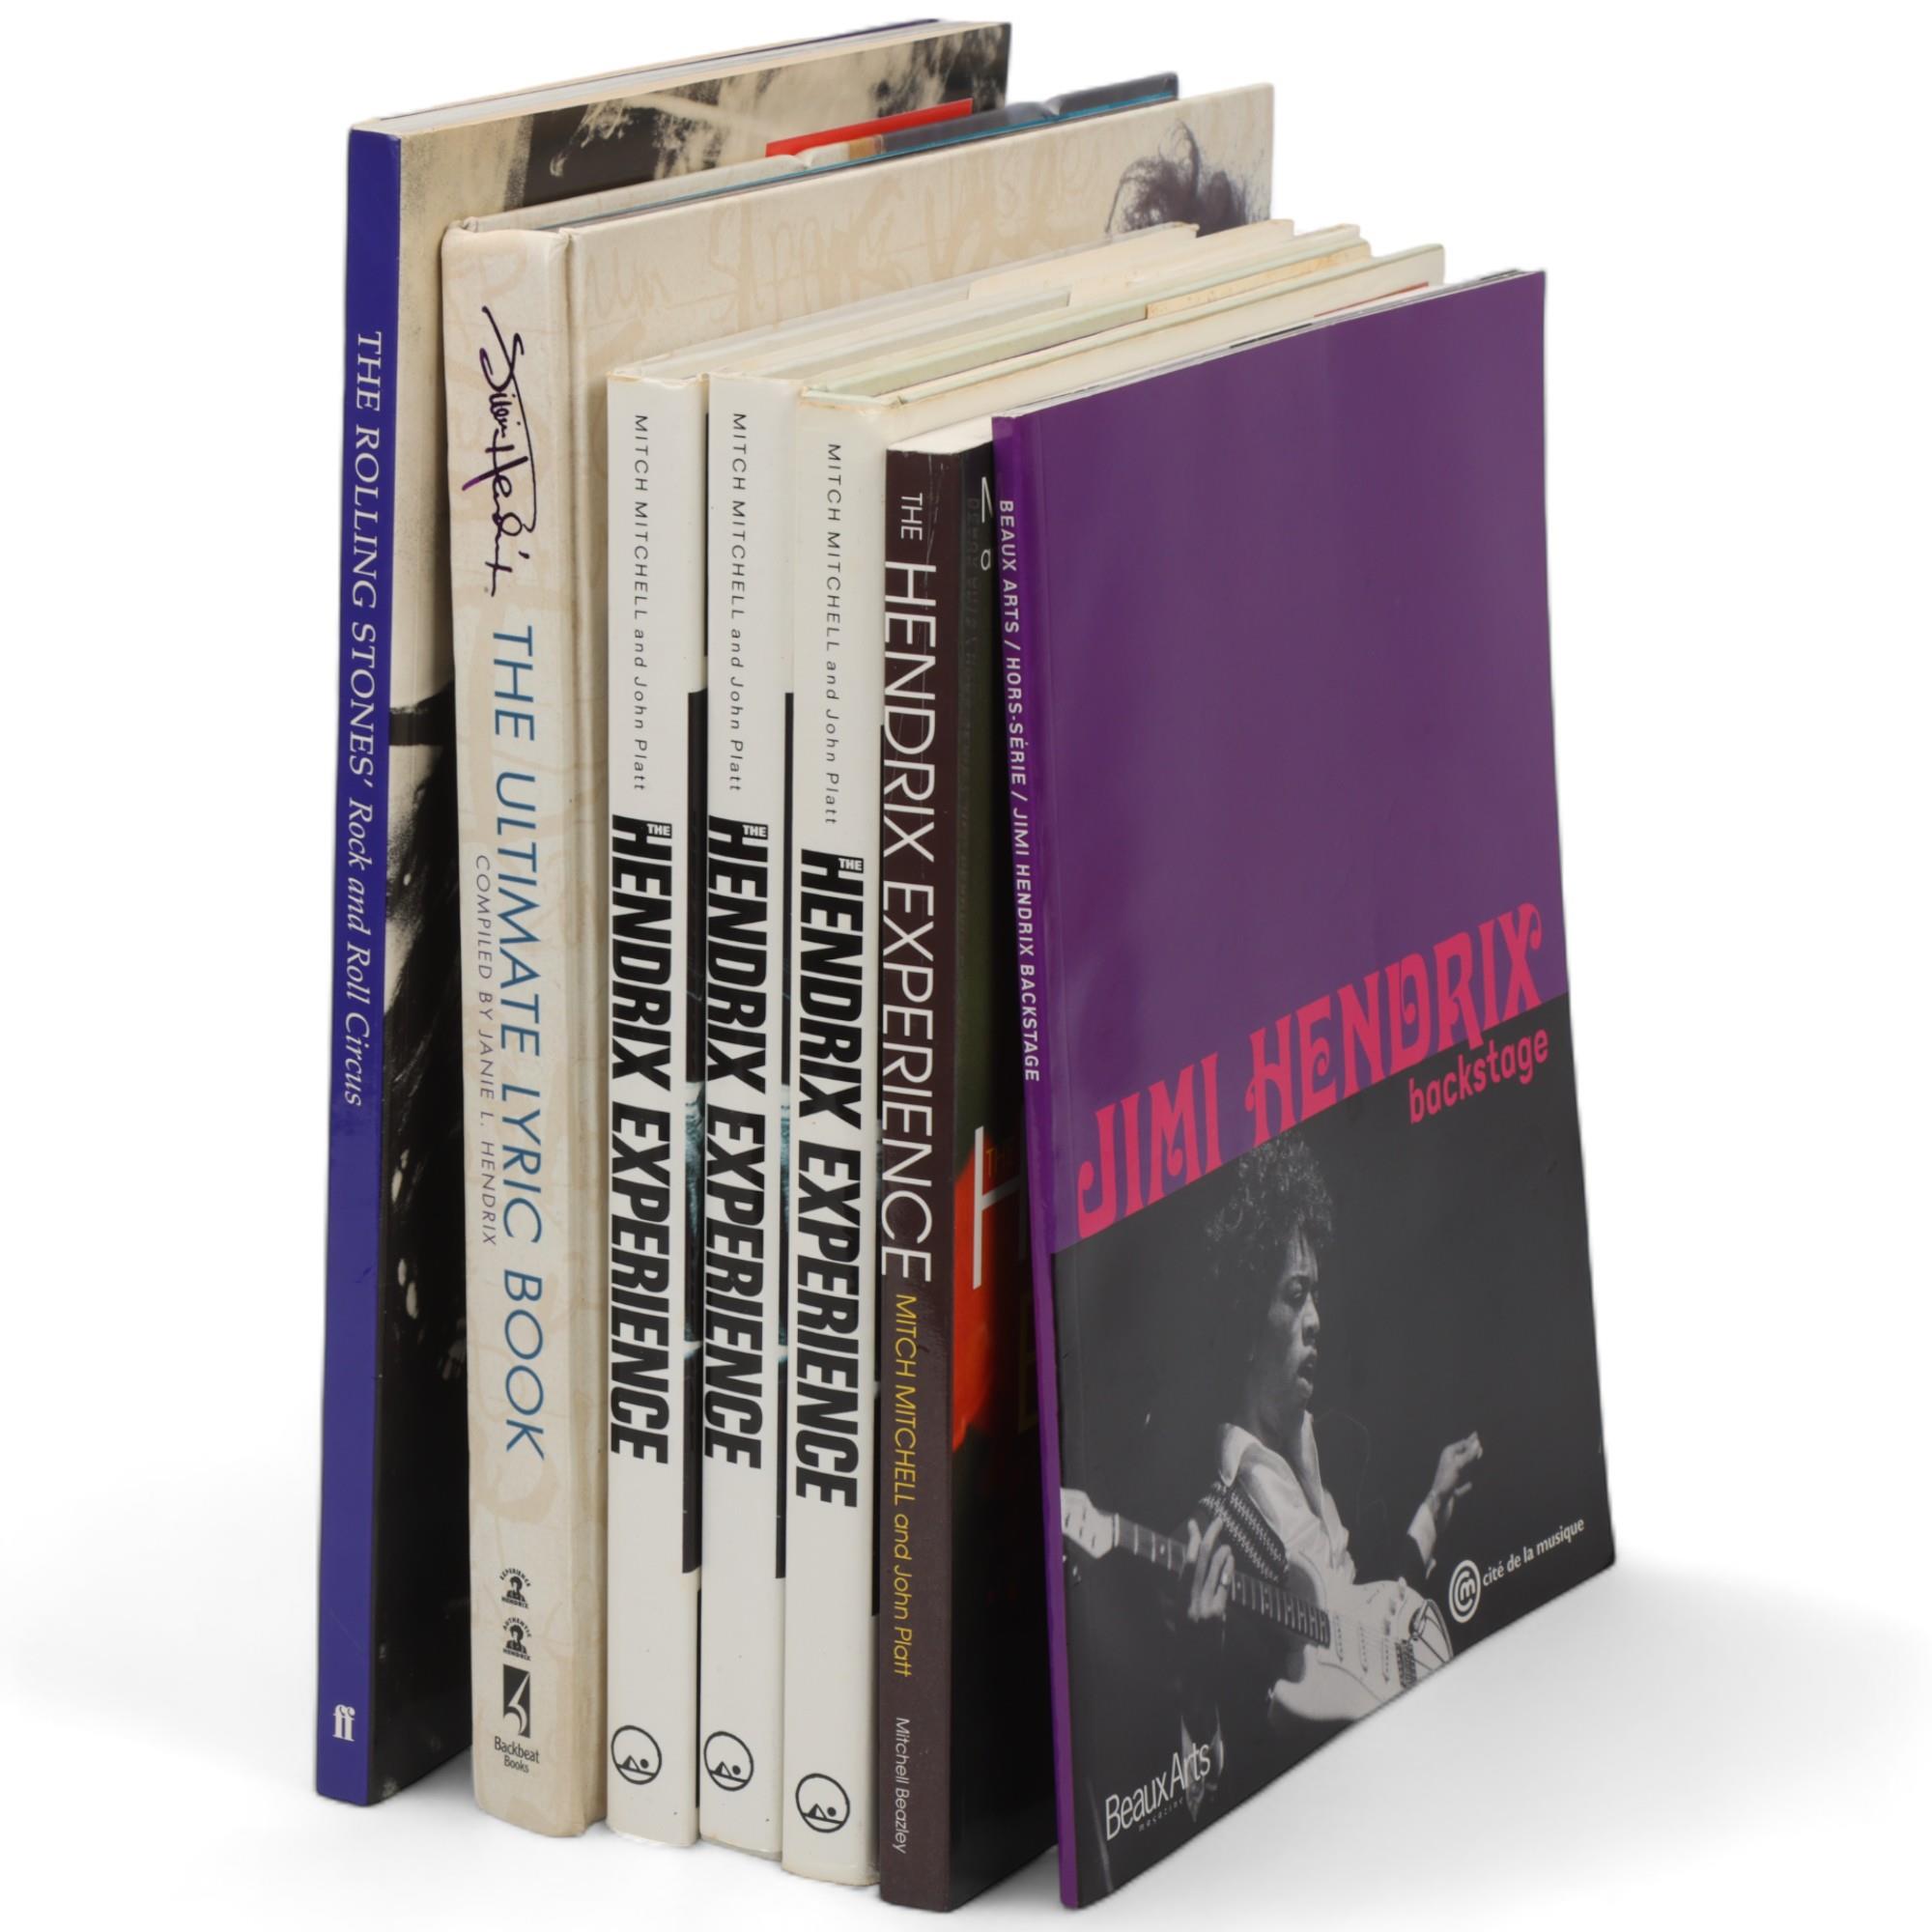 Seven books relating to JIMI HENDRIX & THE 1960s 'The Hendrix Experience' by Mitch Mitchell (soft